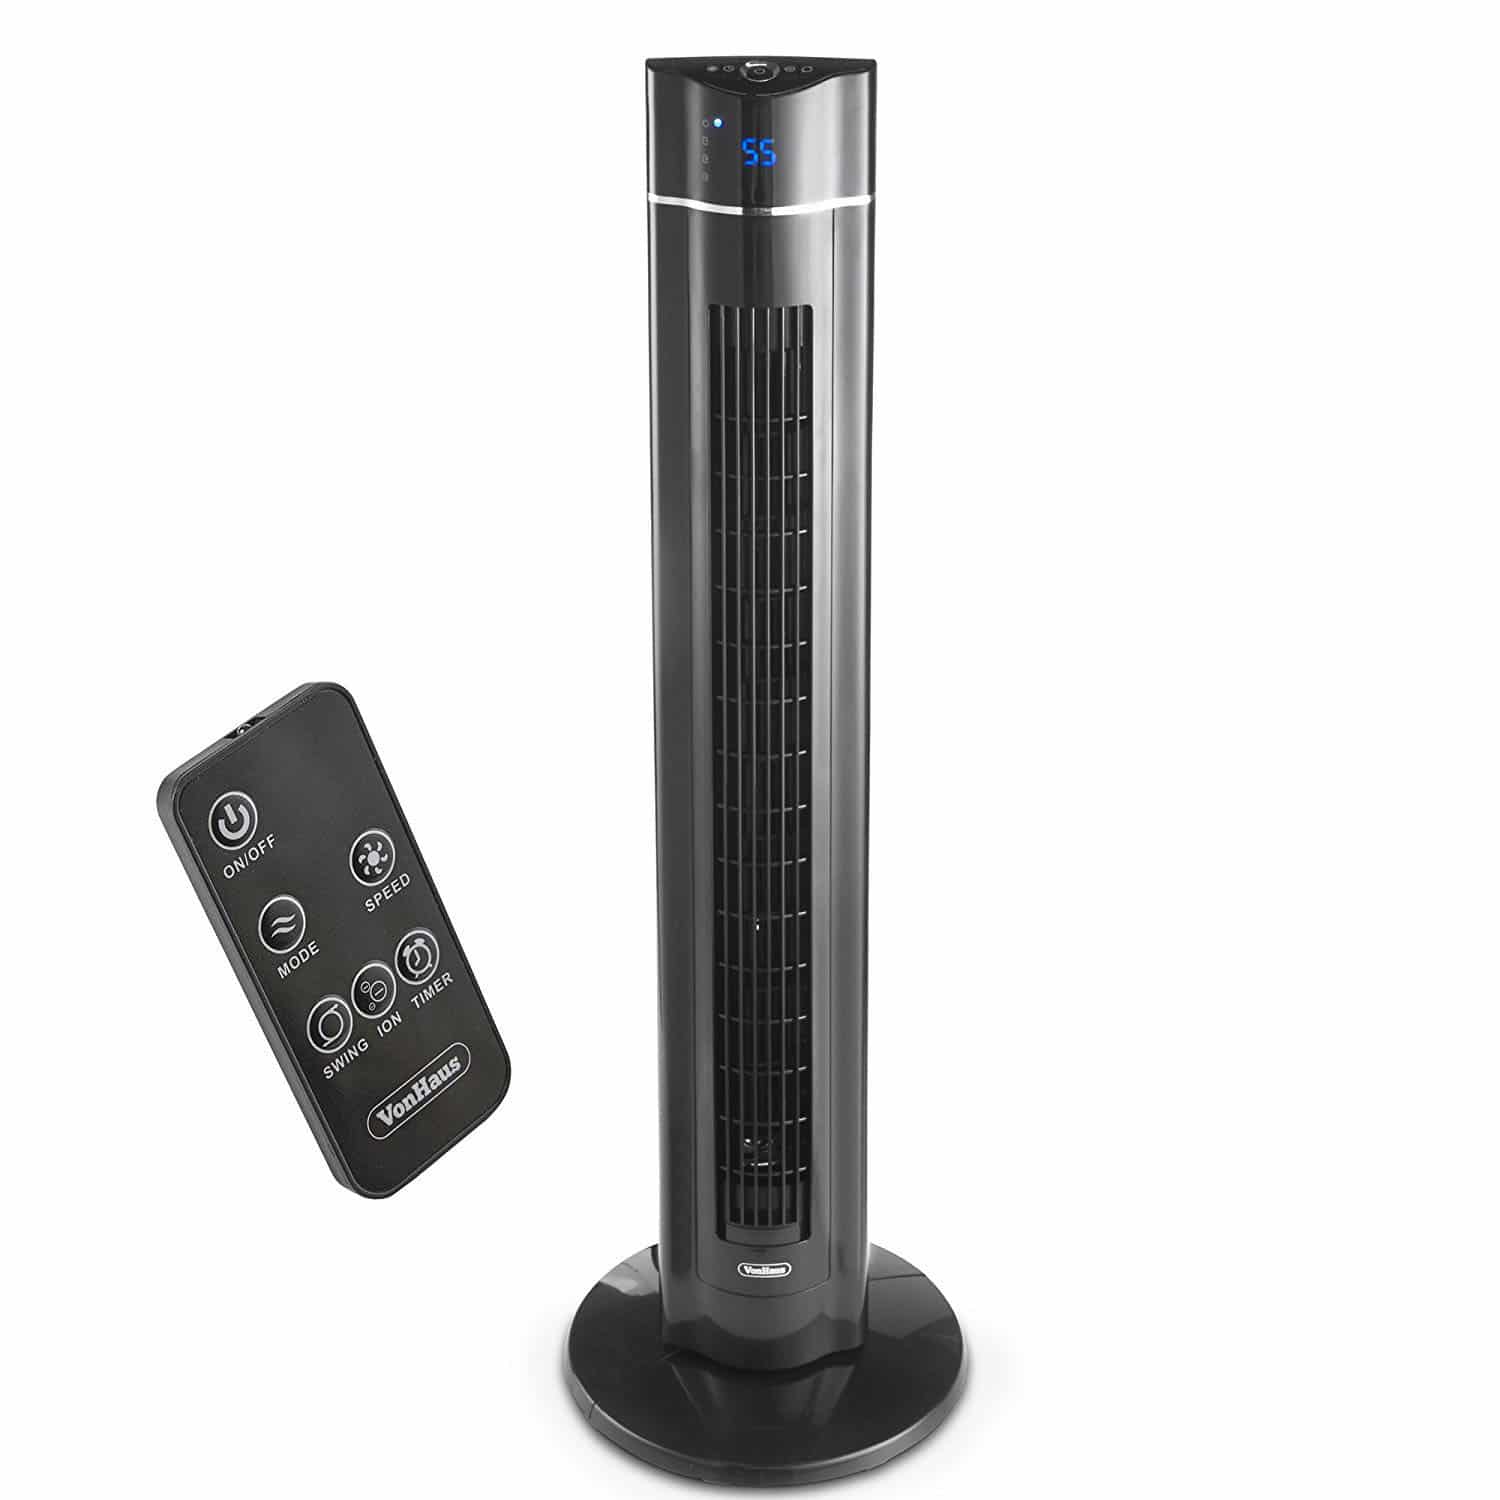 Top 10 Best Tower Fans in 2021 Reviews Buyer's Guide